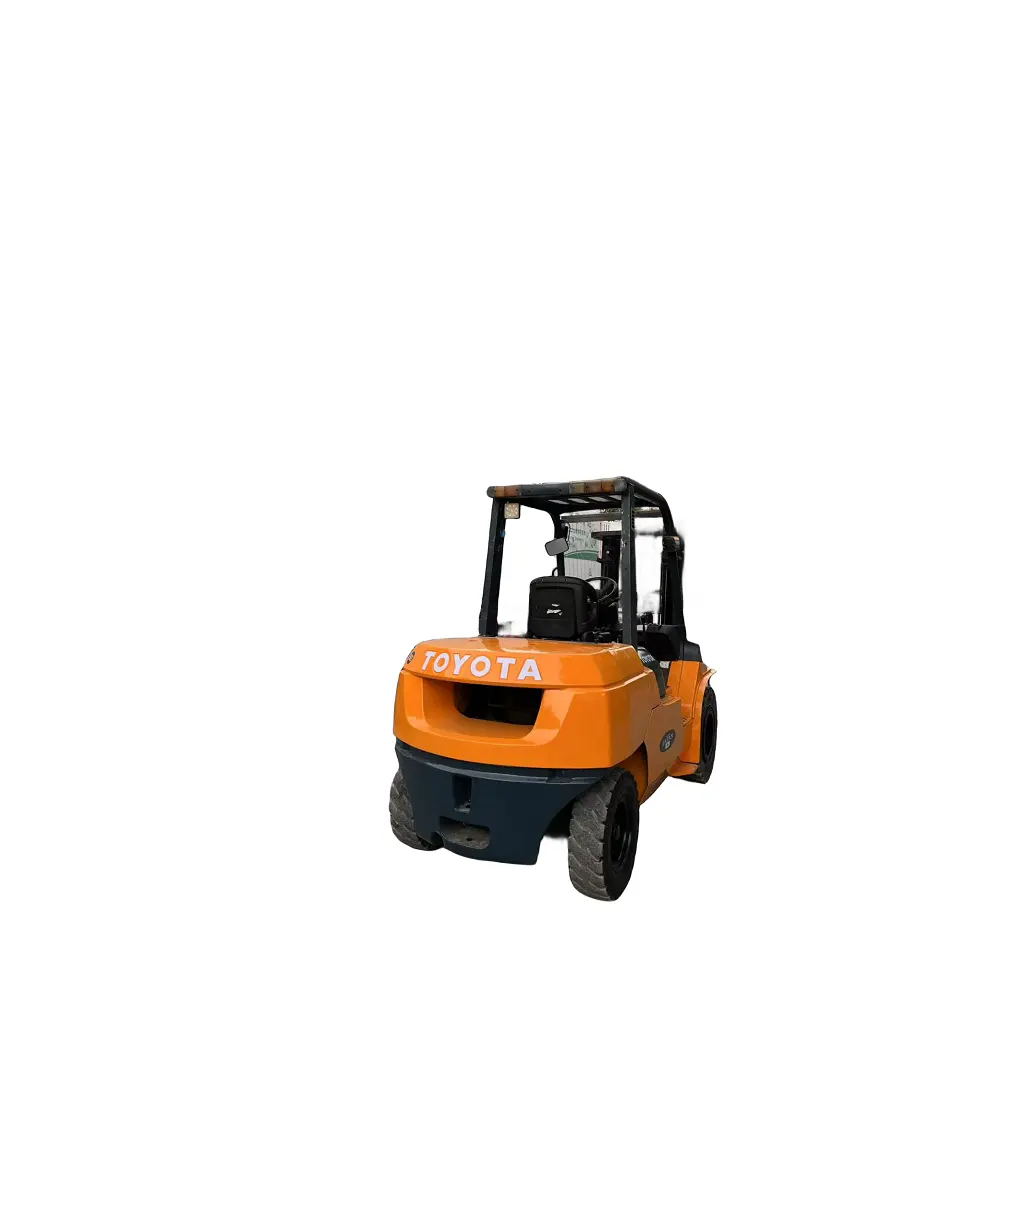 High Quality Used Toyota 5 Ton Diesel Forklift Secondhand Forklift in Good Condition with Competitive Price Core Component Motor